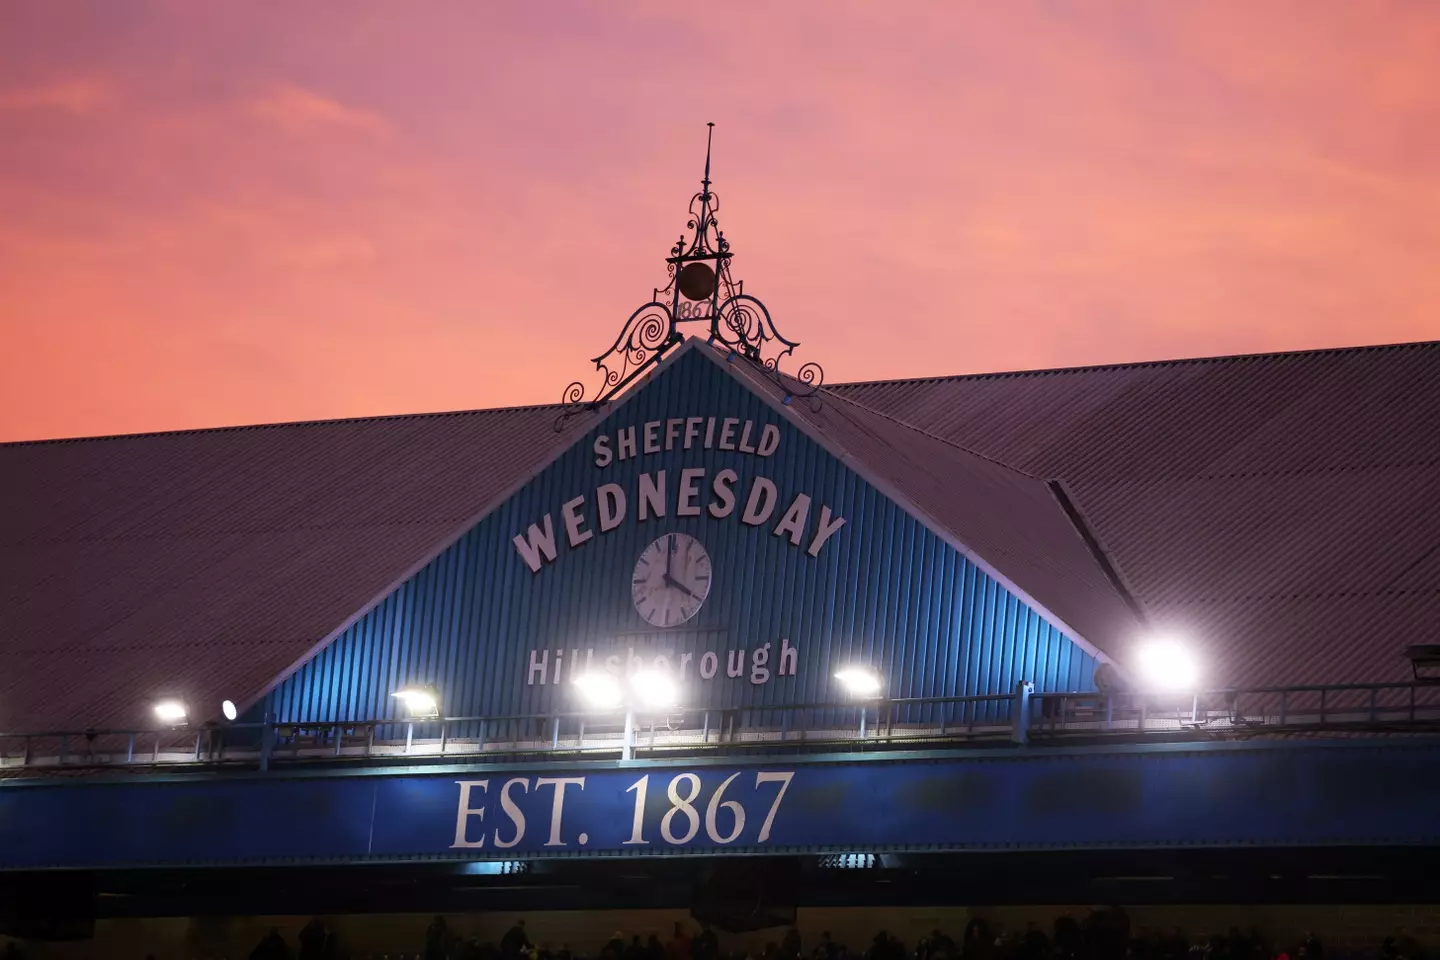 Hillsborough is one of the most famous English football grounds. (